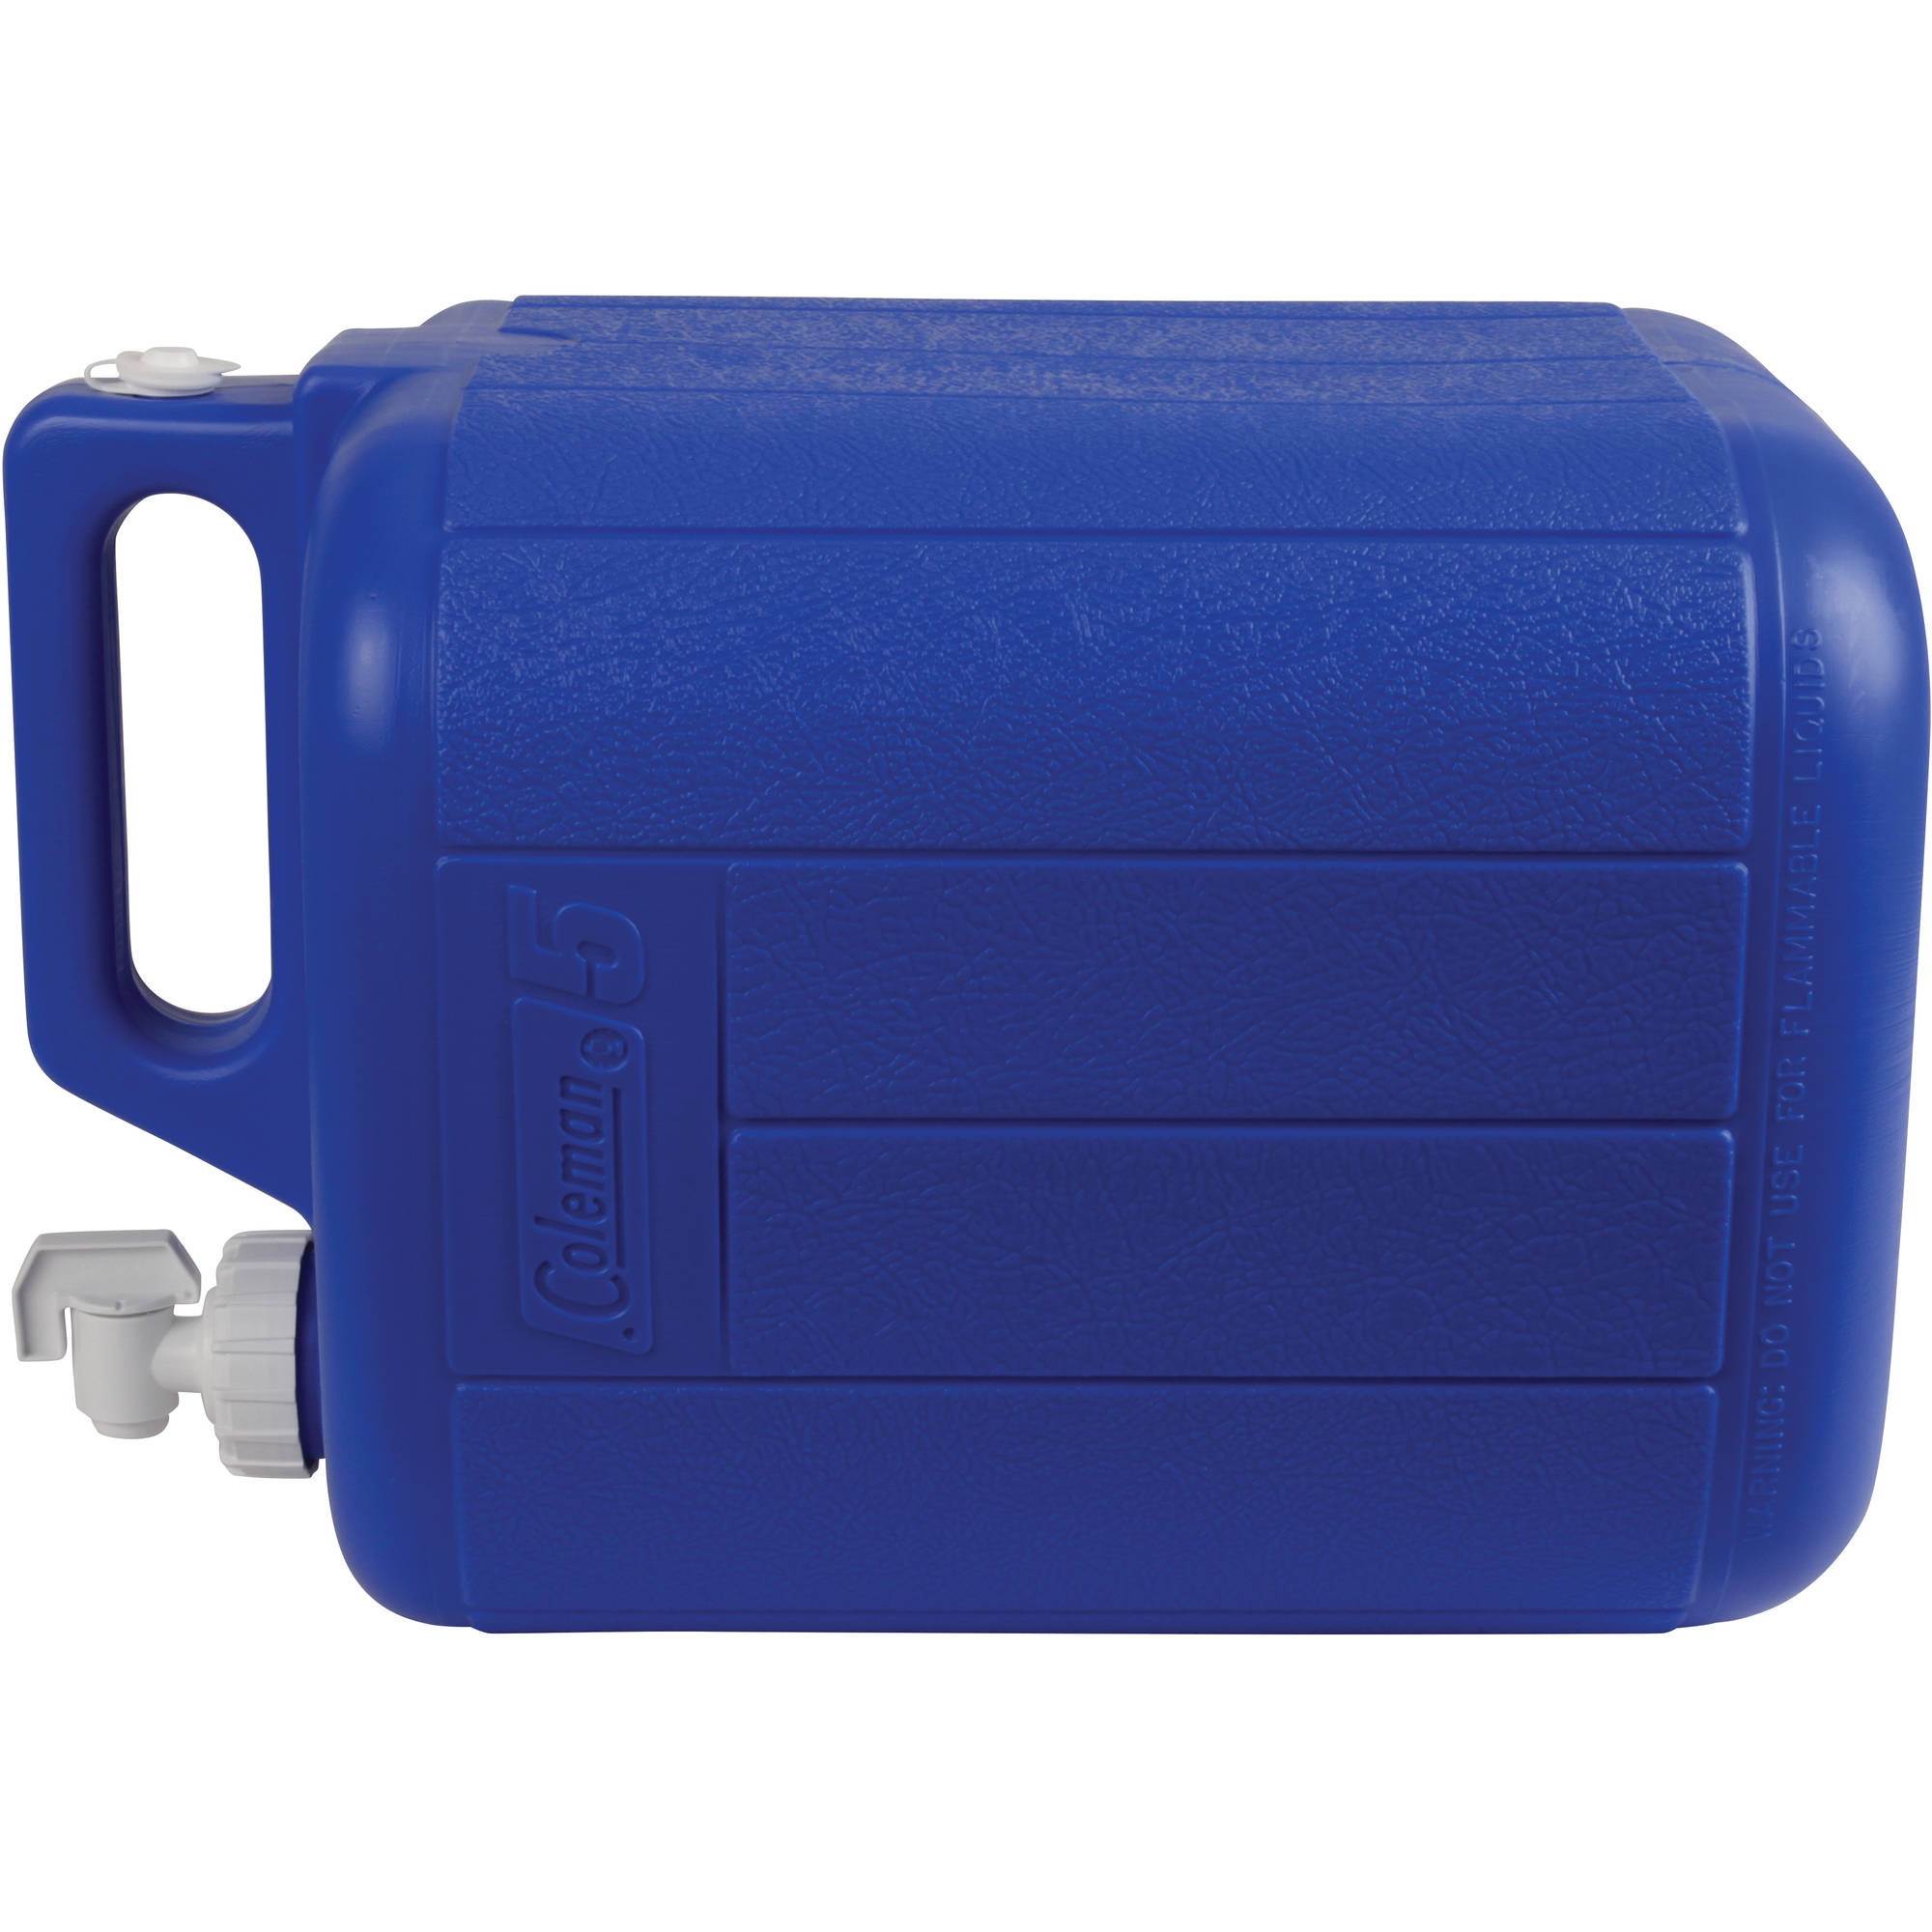 Coleman 5-Gallon Water Carrier, Blue - image 4 of 5